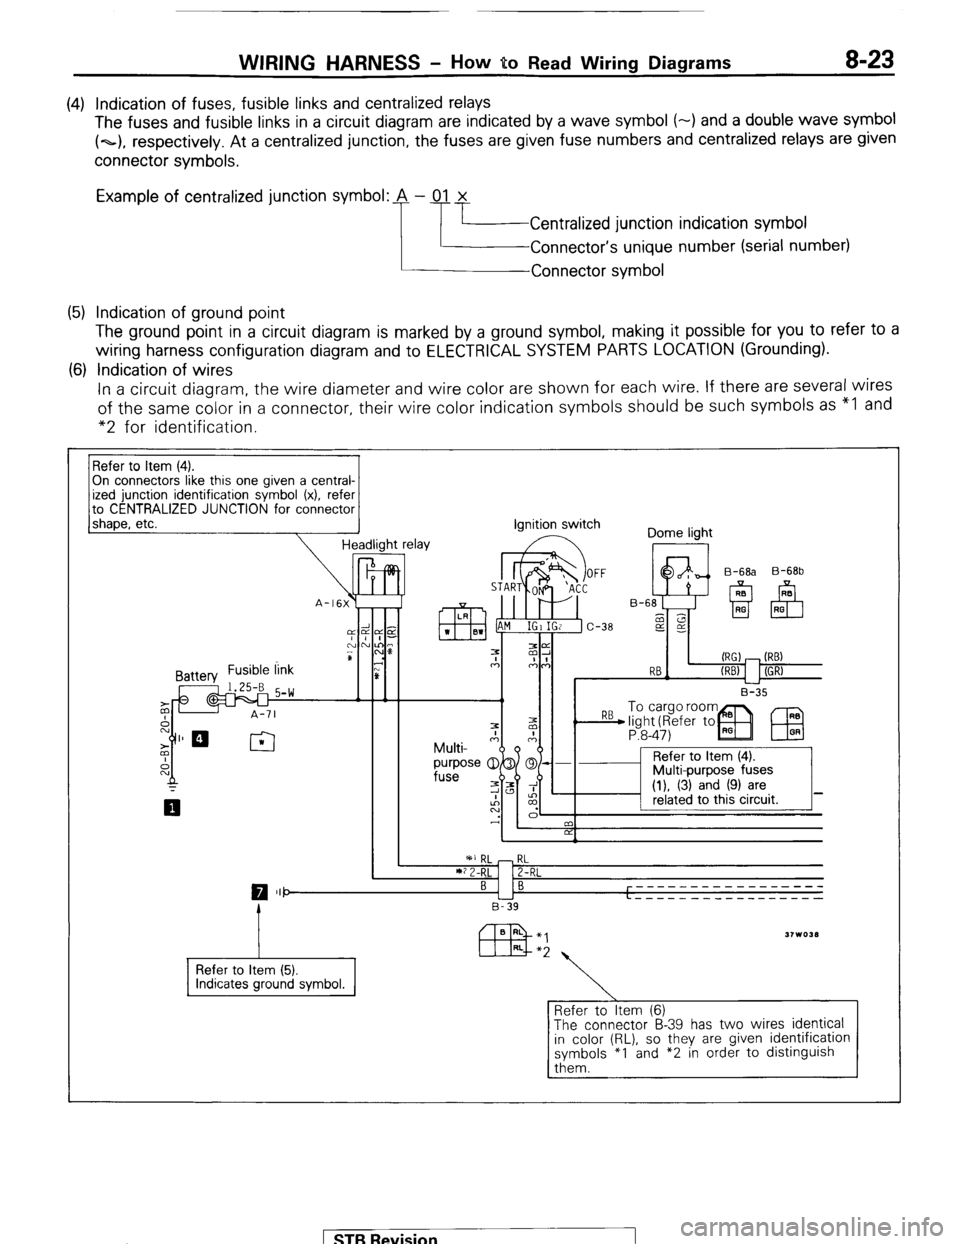 MITSUBISHI MONTERO 1987 1.G Workshop Manual WIRING HARNESS - HOW BO Read Wiring Diagrams 8-23 
(4) Indication of fuses, fusible links and centralized relays 
The fuses and fusible links in a circuit diagram are indicated by a wave symbol (-) an